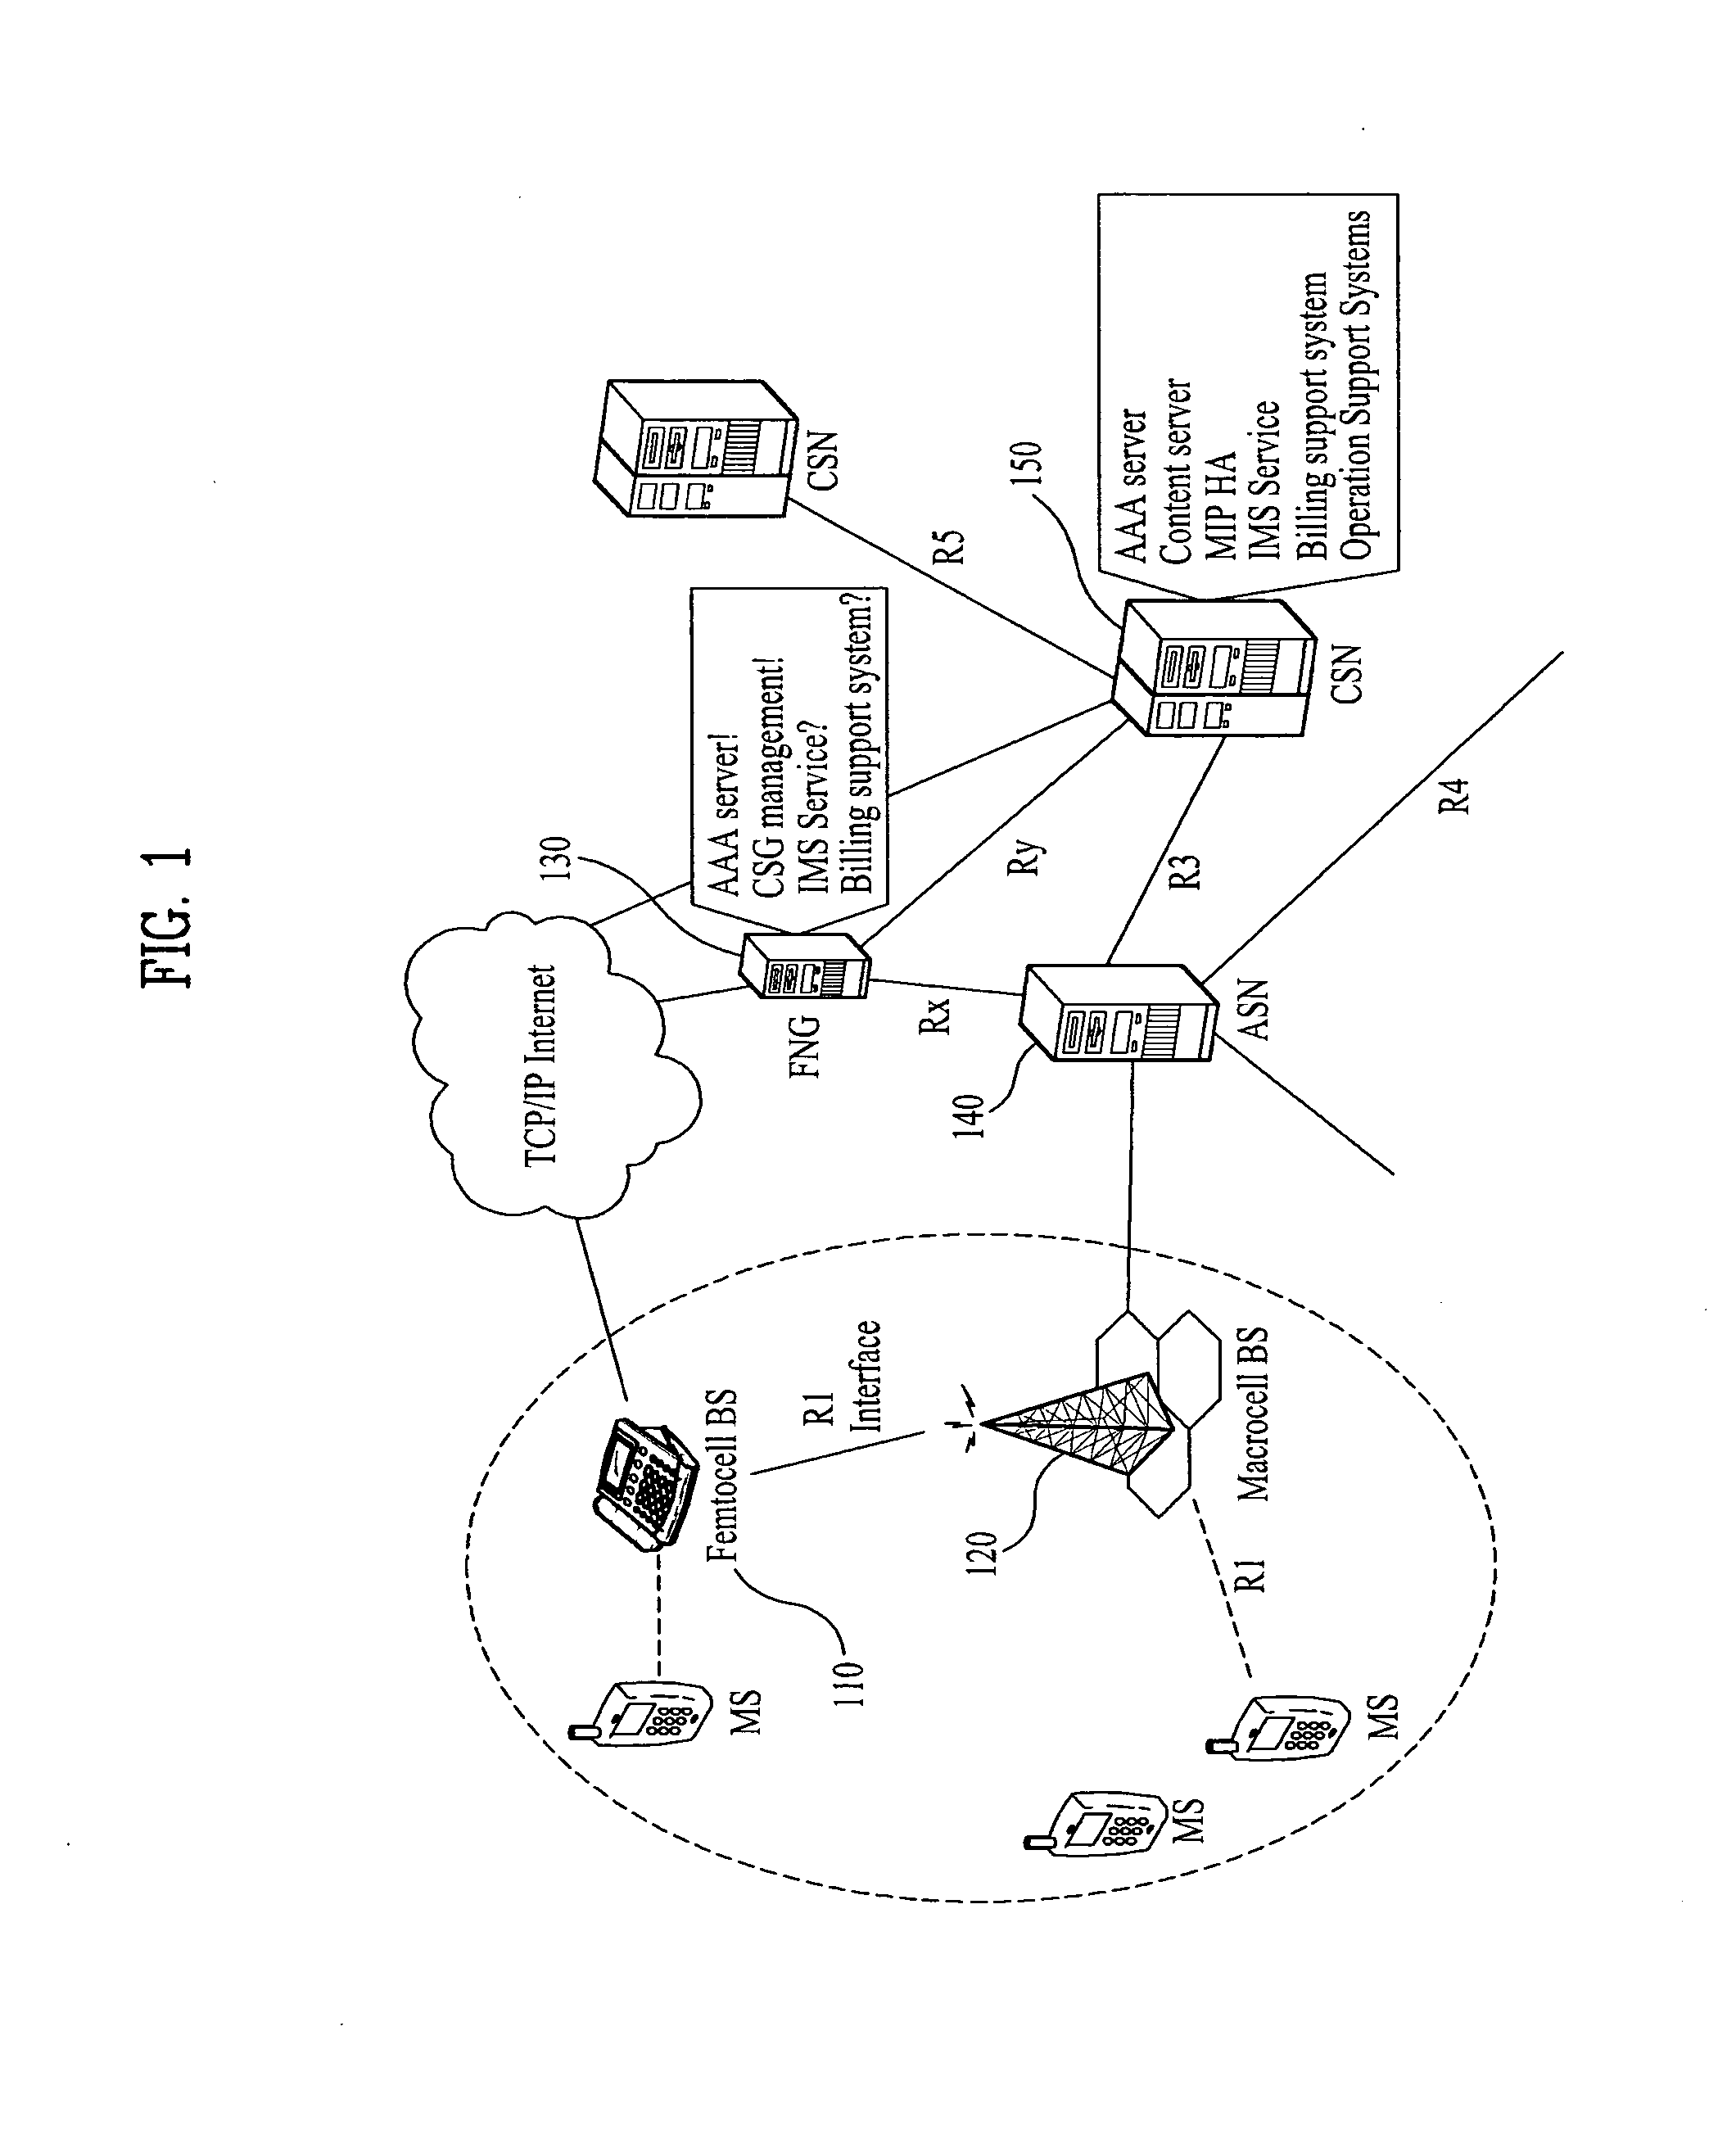 Method for Contention-Based Scheduling of Downlink Signal Transmissions